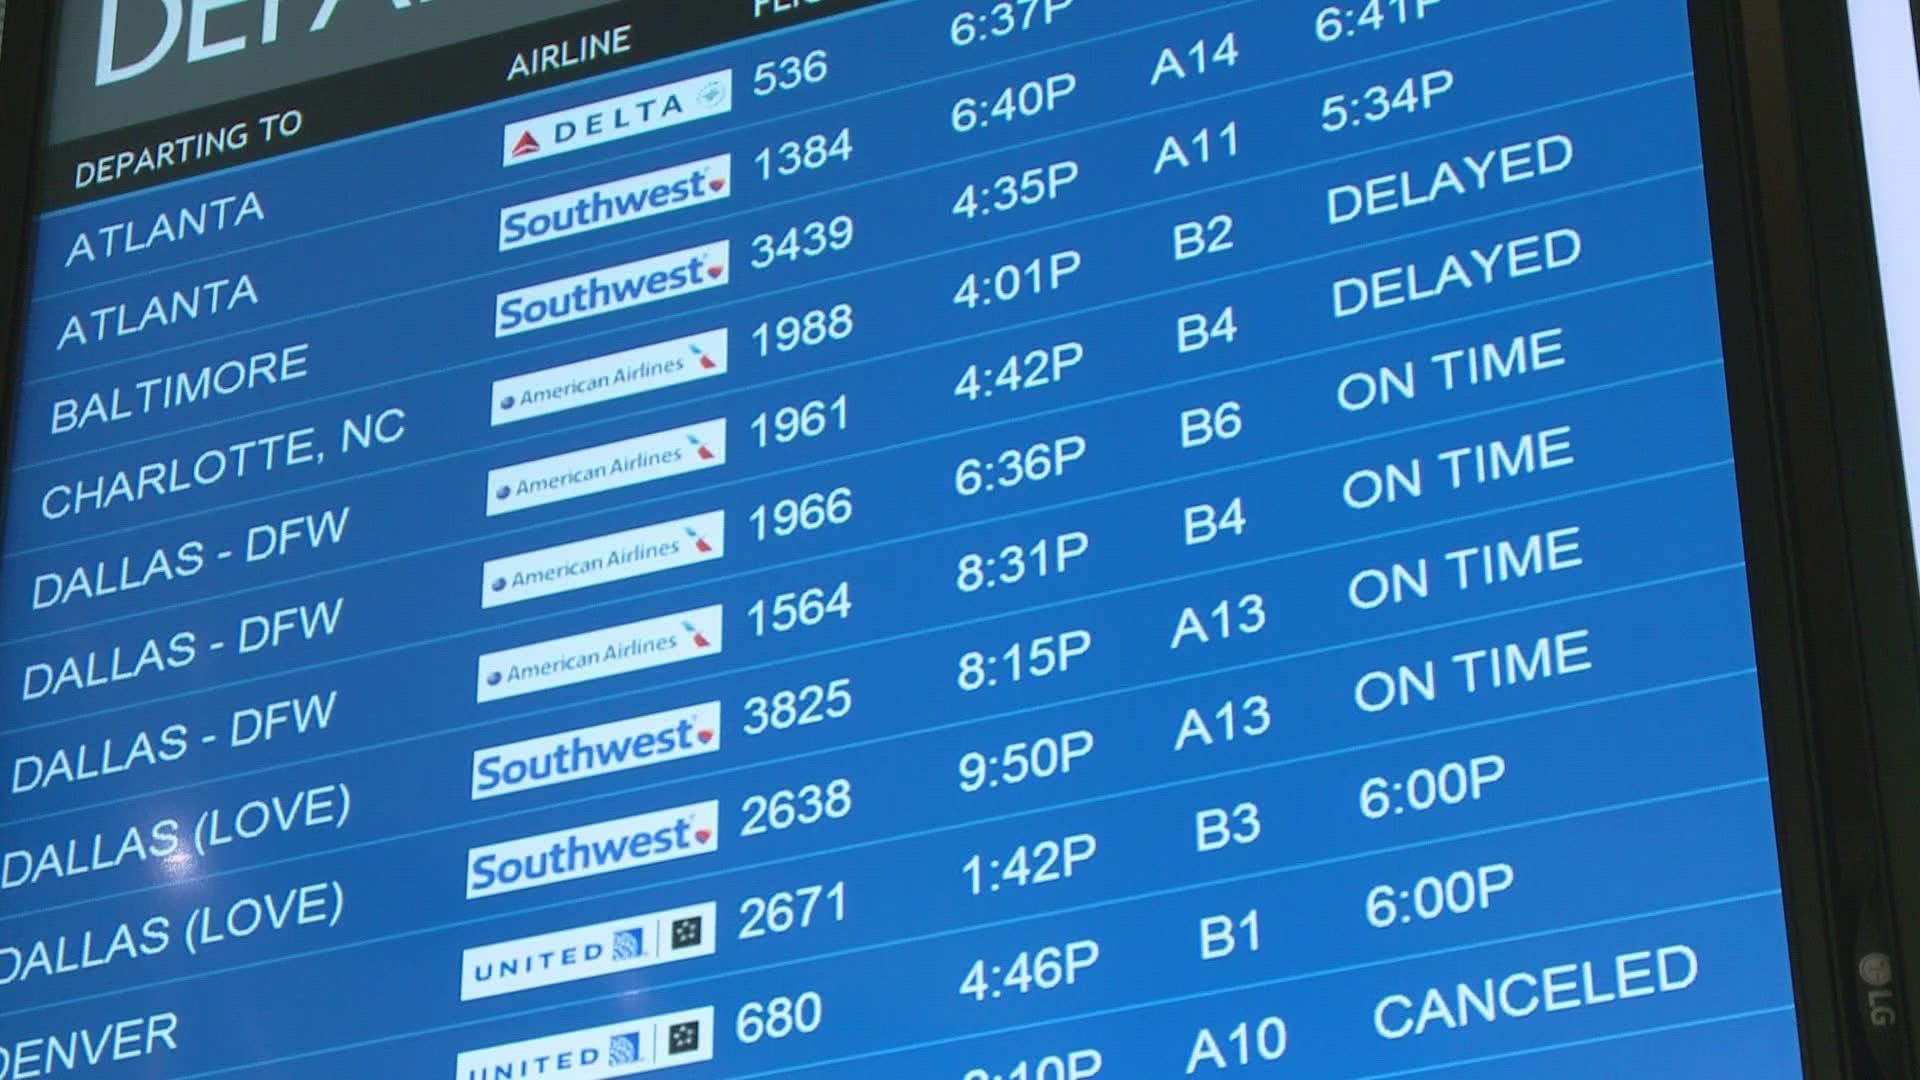 Flyers are encouraged to arrive at the airport at least two hours before boarding time and routinely monitor flight status through their airline's app.